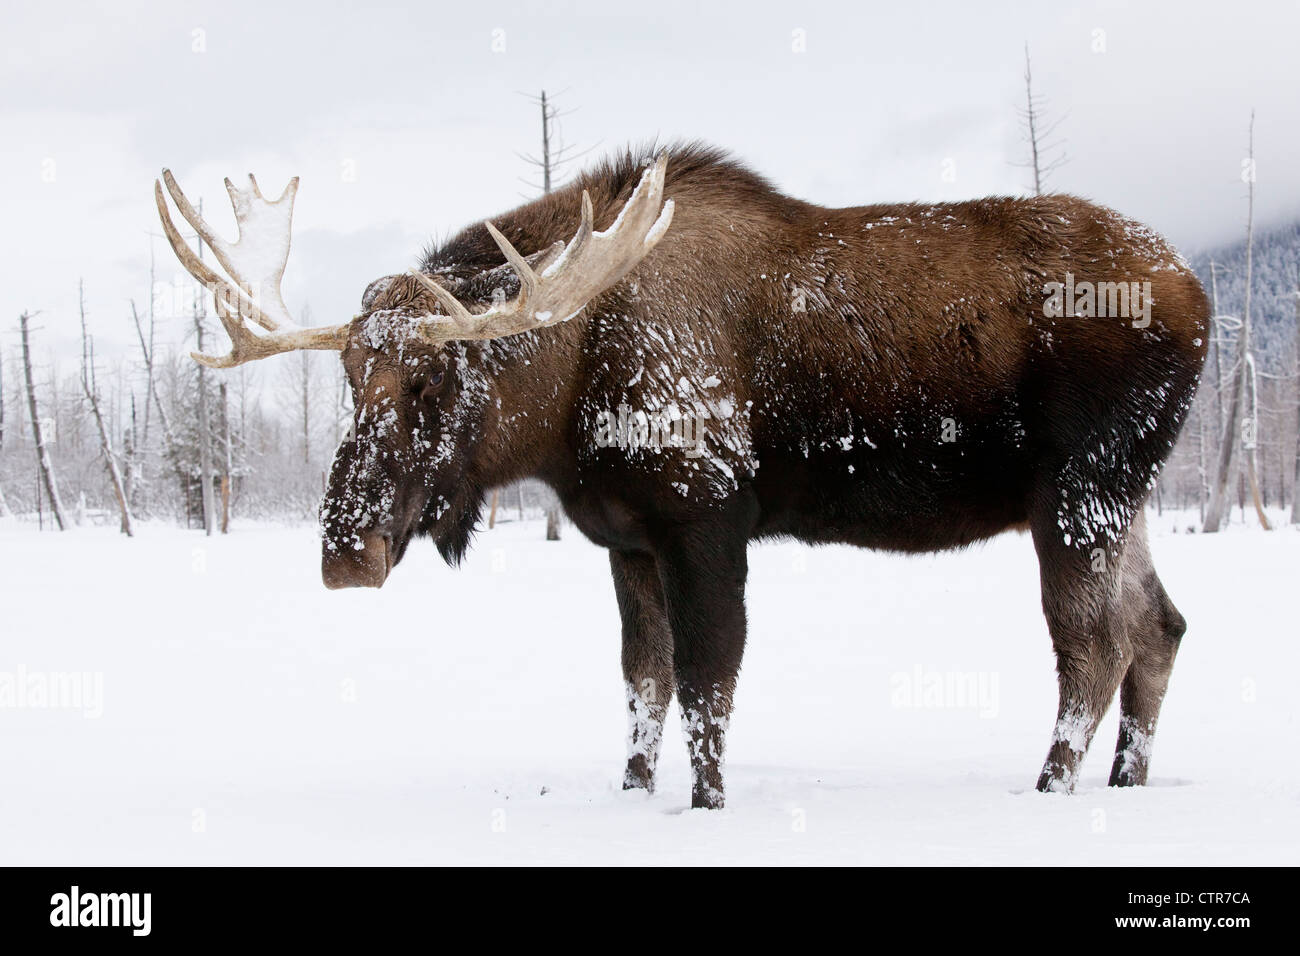 CAPTIVE: bull moose with antlers in snow, Alaska Wildlife Conservation Center, Southcentral Alaska, Winter Stock Photo